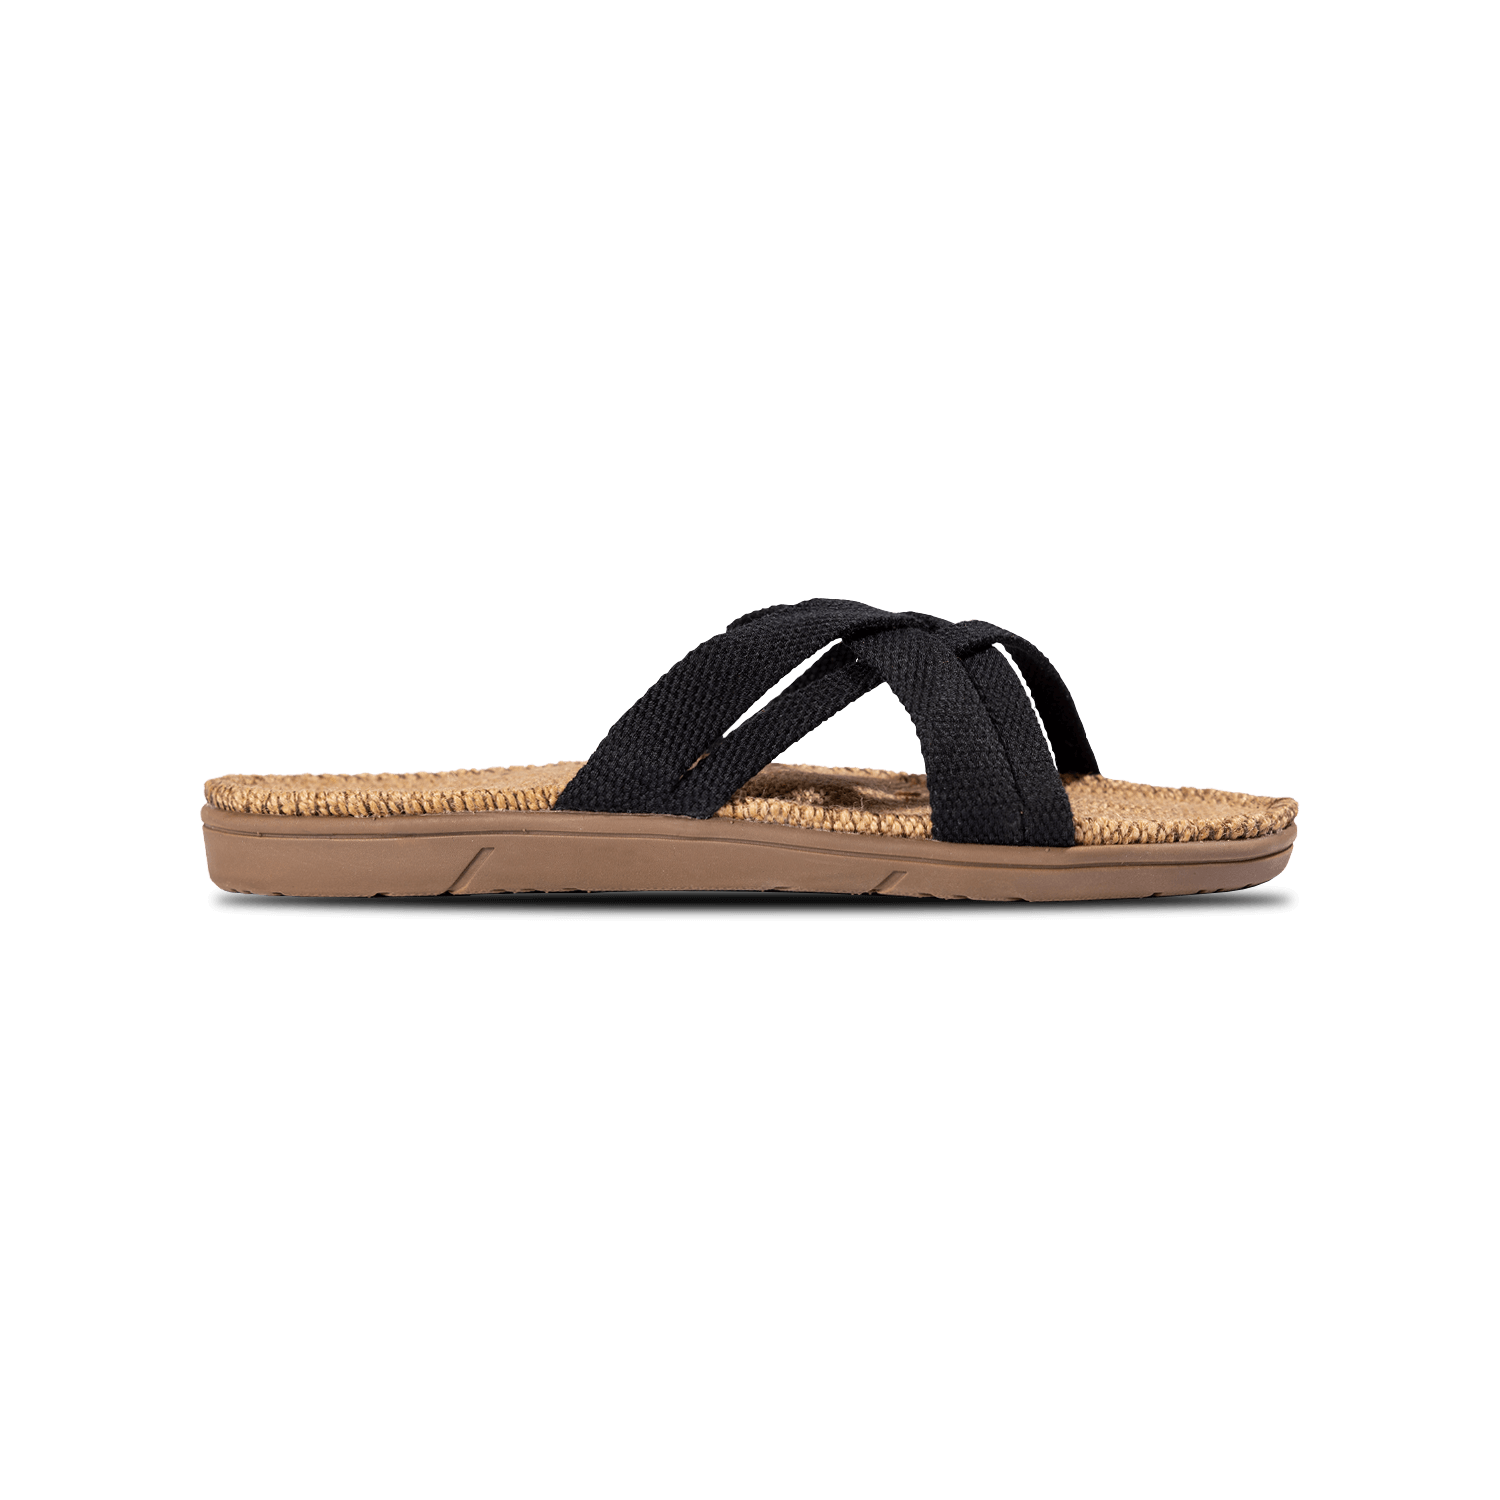 The side profile of a women's Shangies sandal with black straps and a natural jute sole